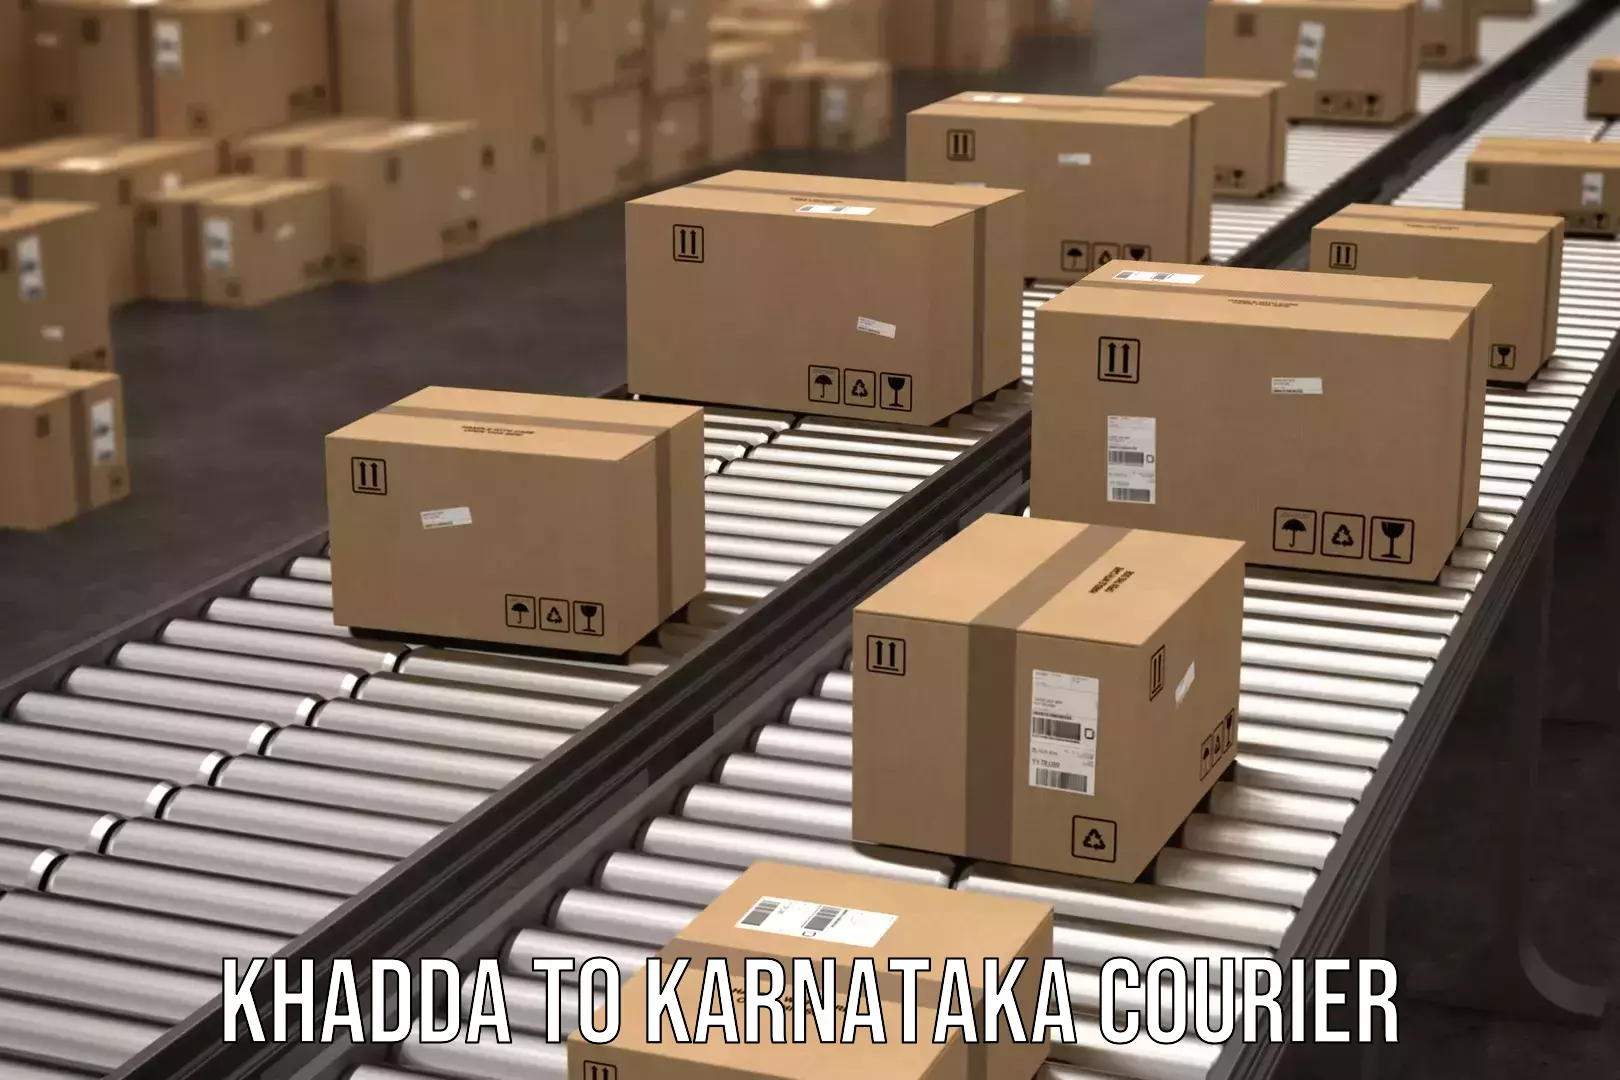 Premium courier services Khadda to Manipal